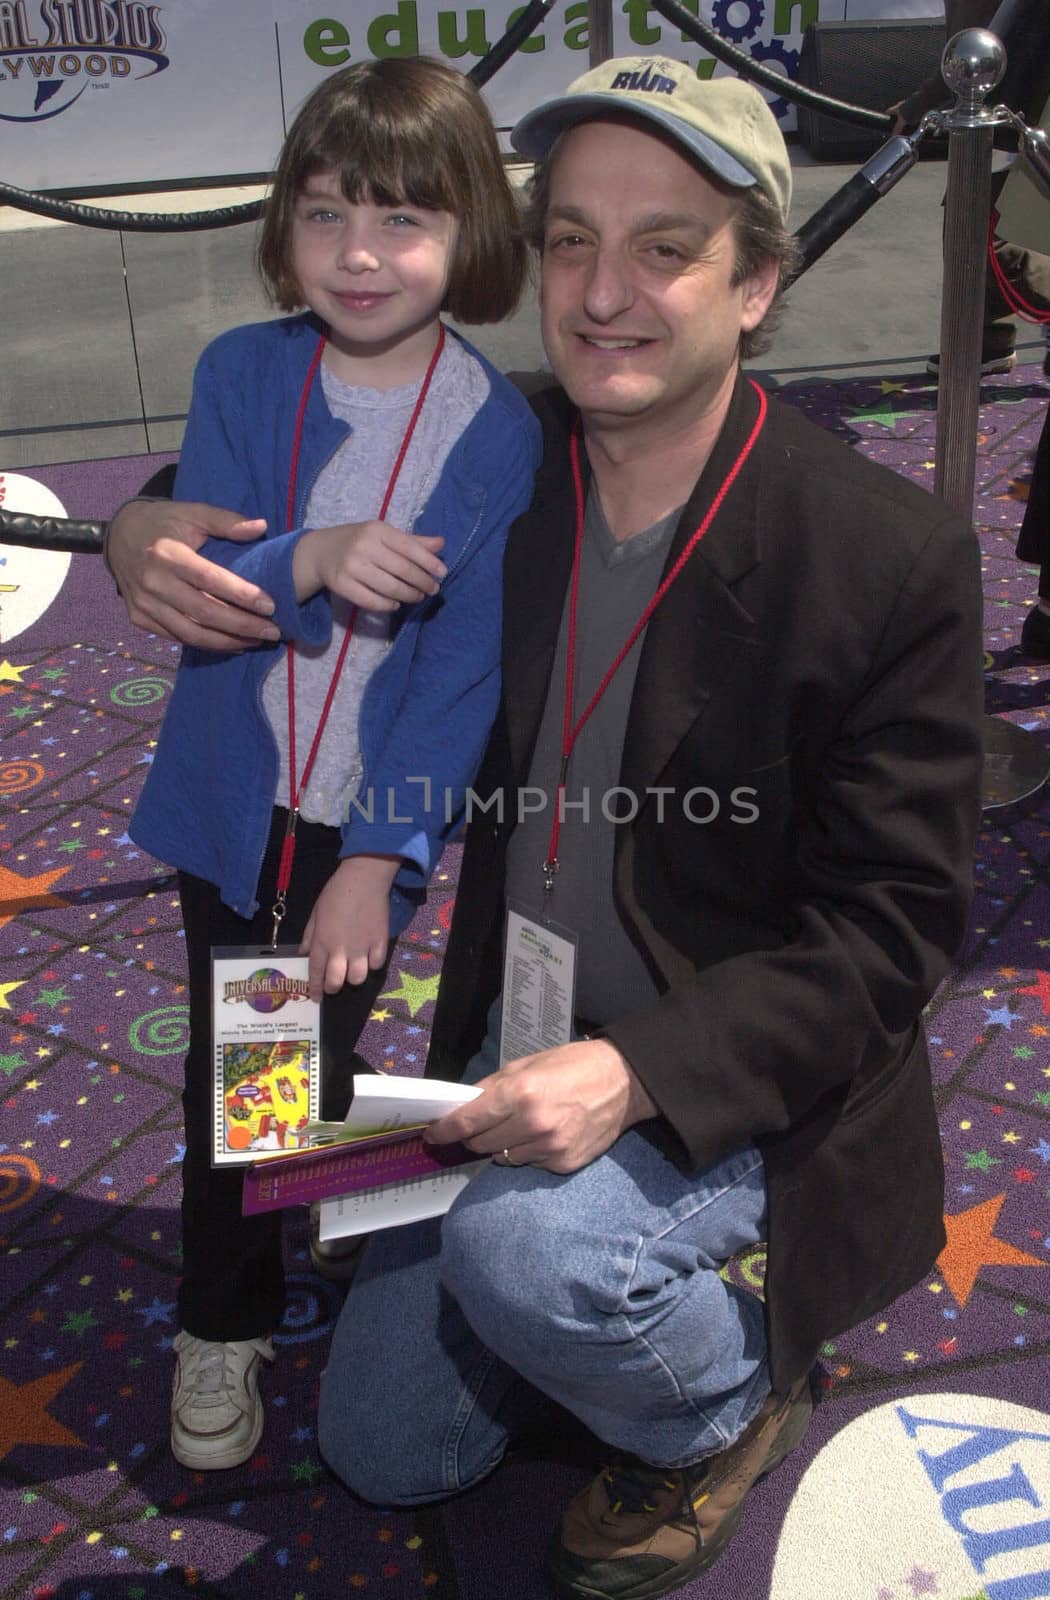 David Paymer and Daughter at the Education Works benefit to promote after-school activities, Universal Studios Hollywood, 03-25-00